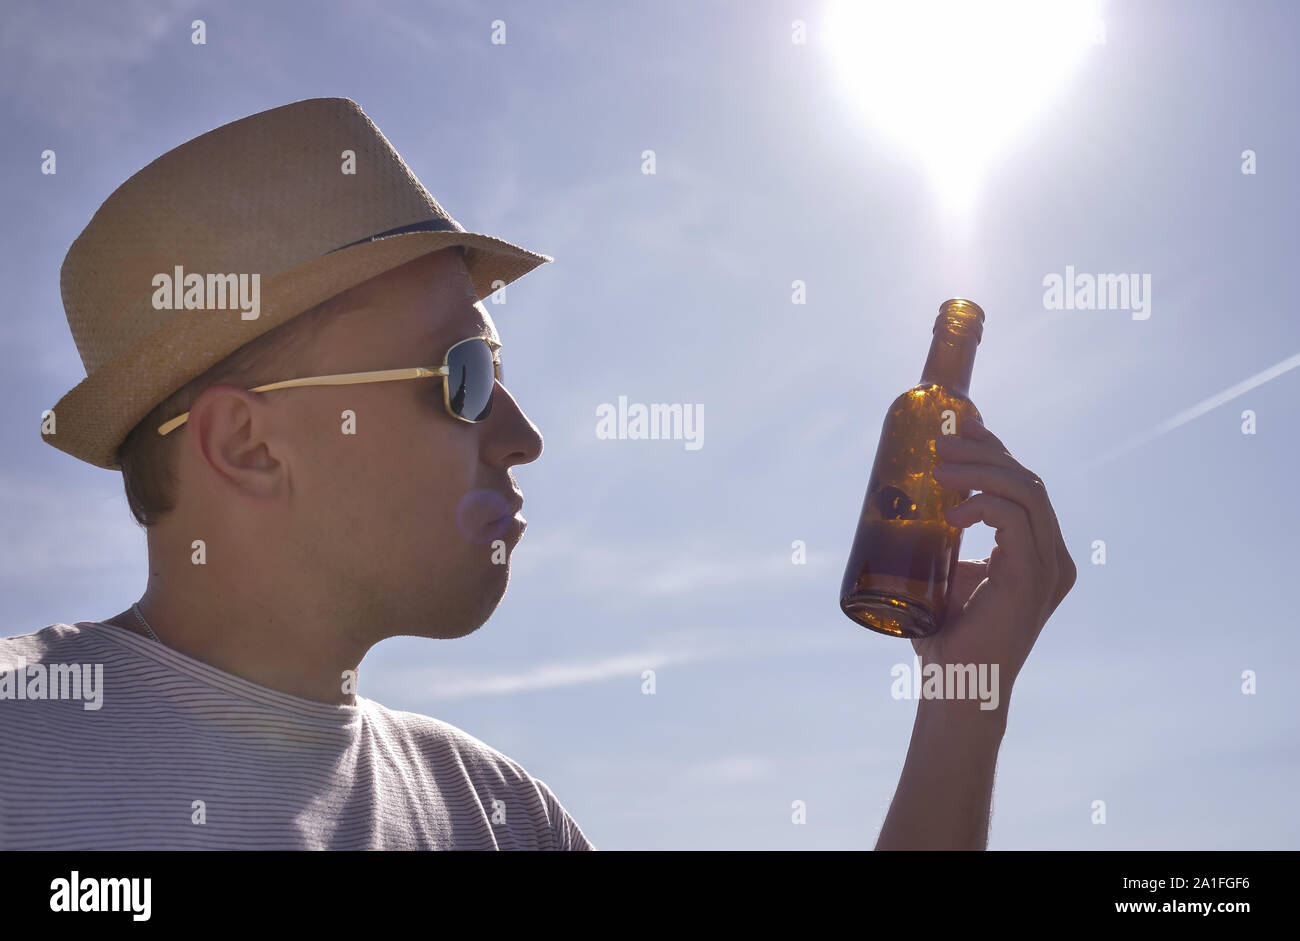 Attractive young man in a hat examines a brown bottle with a drink, outdoors against a blue sky Stock Photo